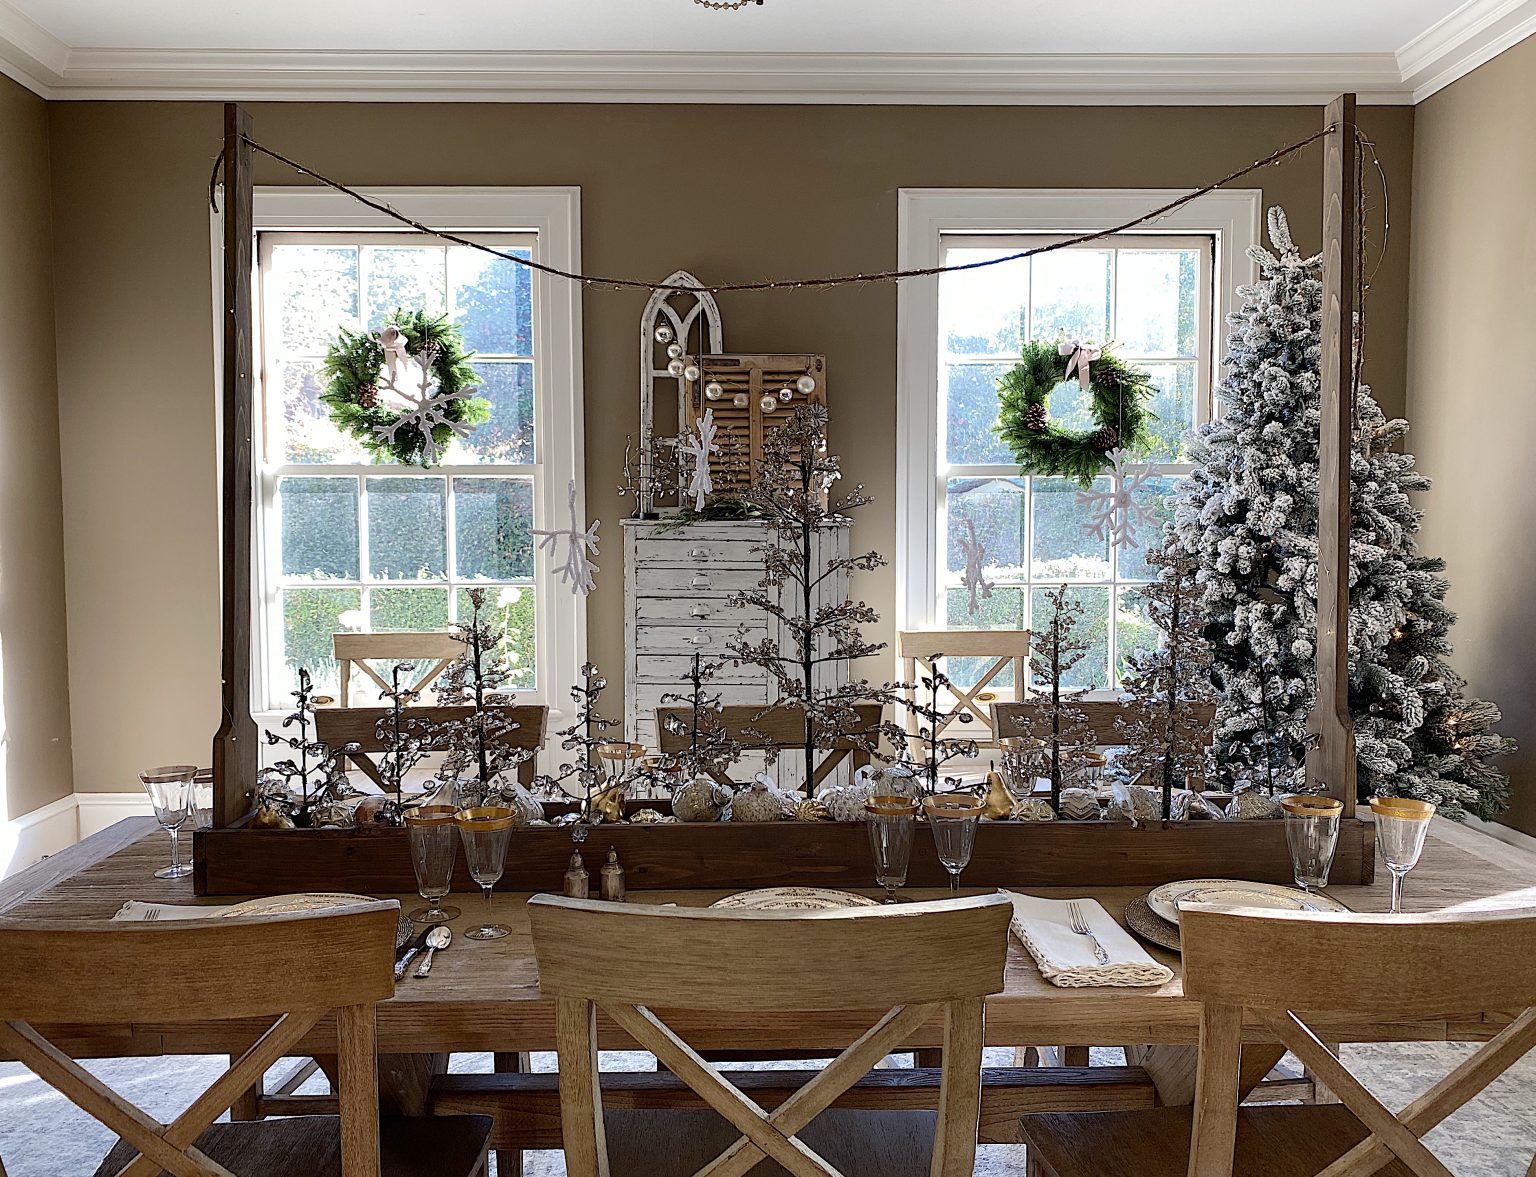 christmas decor in dining room